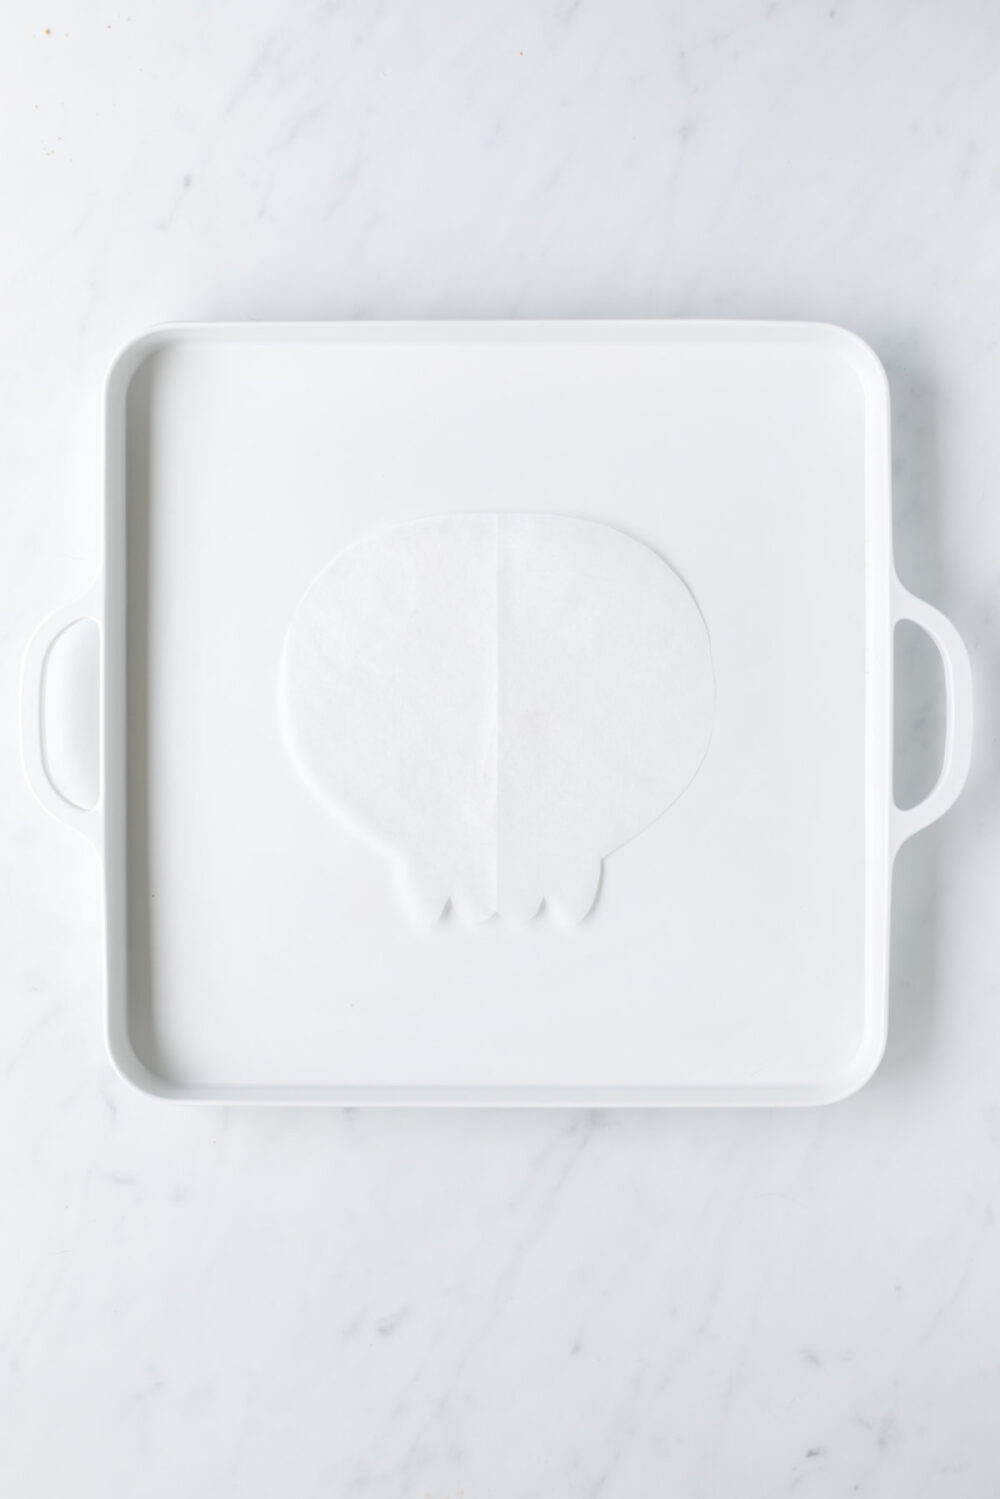 Skull template on a white serving board. 